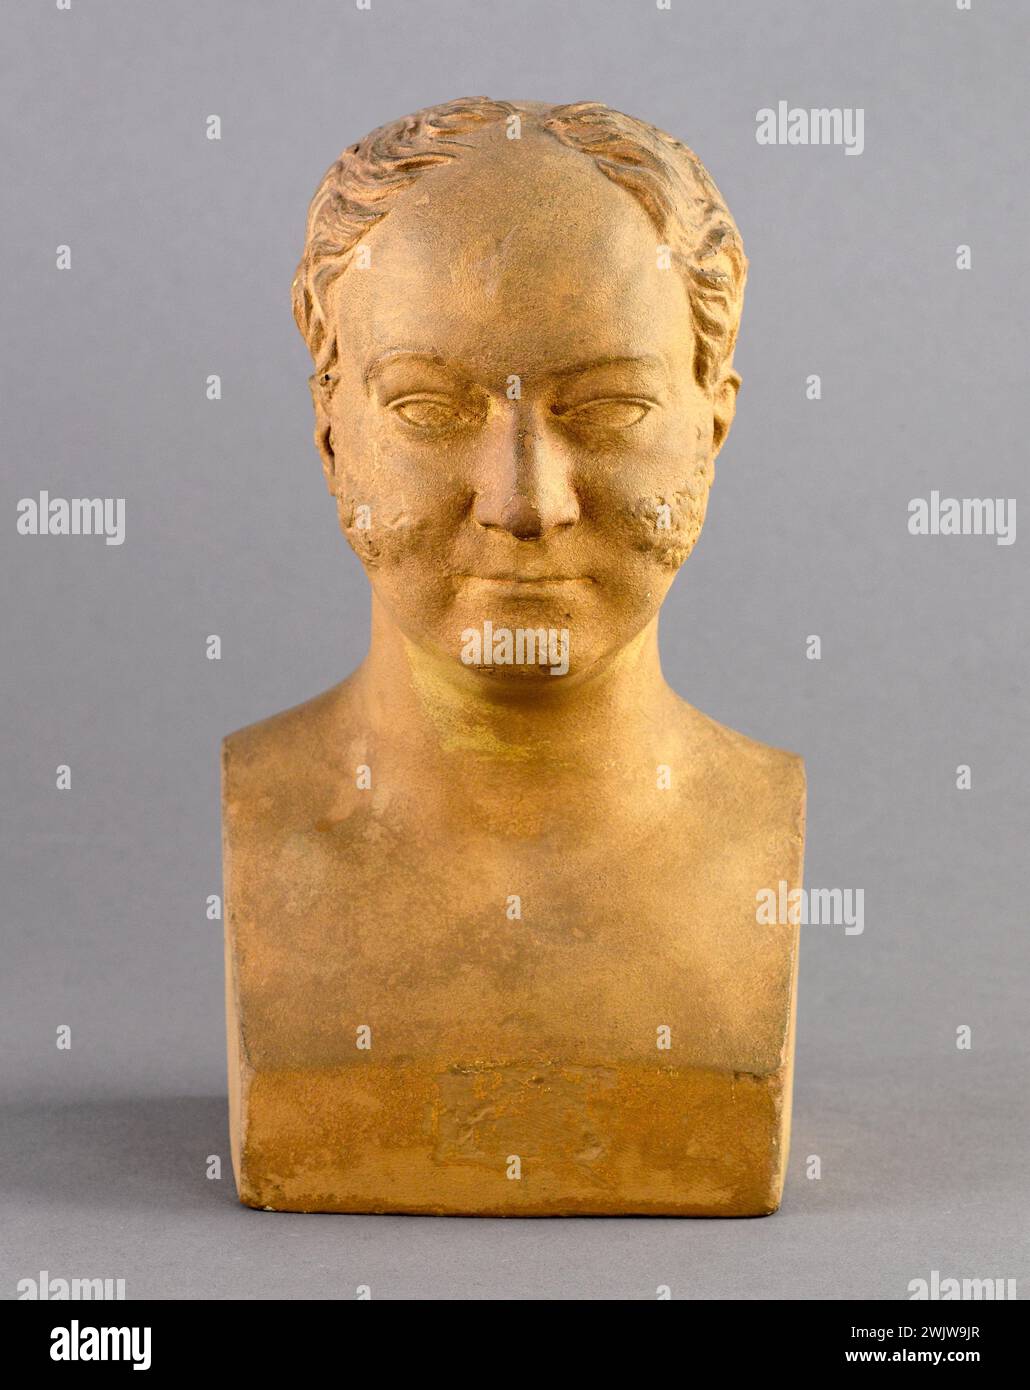 Jean-Pierre Dantan (1800-1869) said Dantan the young. Serious portrait of Louis-Félix-Etienne, Marquis de Turgot (1796-1866), administrator and officer. Terracotta patinated plaster. 1841. Paris, Carnavalet museum. 53354-5 Administrator, French politician, Marquis, officer, pattero patina, serious portrait, terracotta Stock Photo